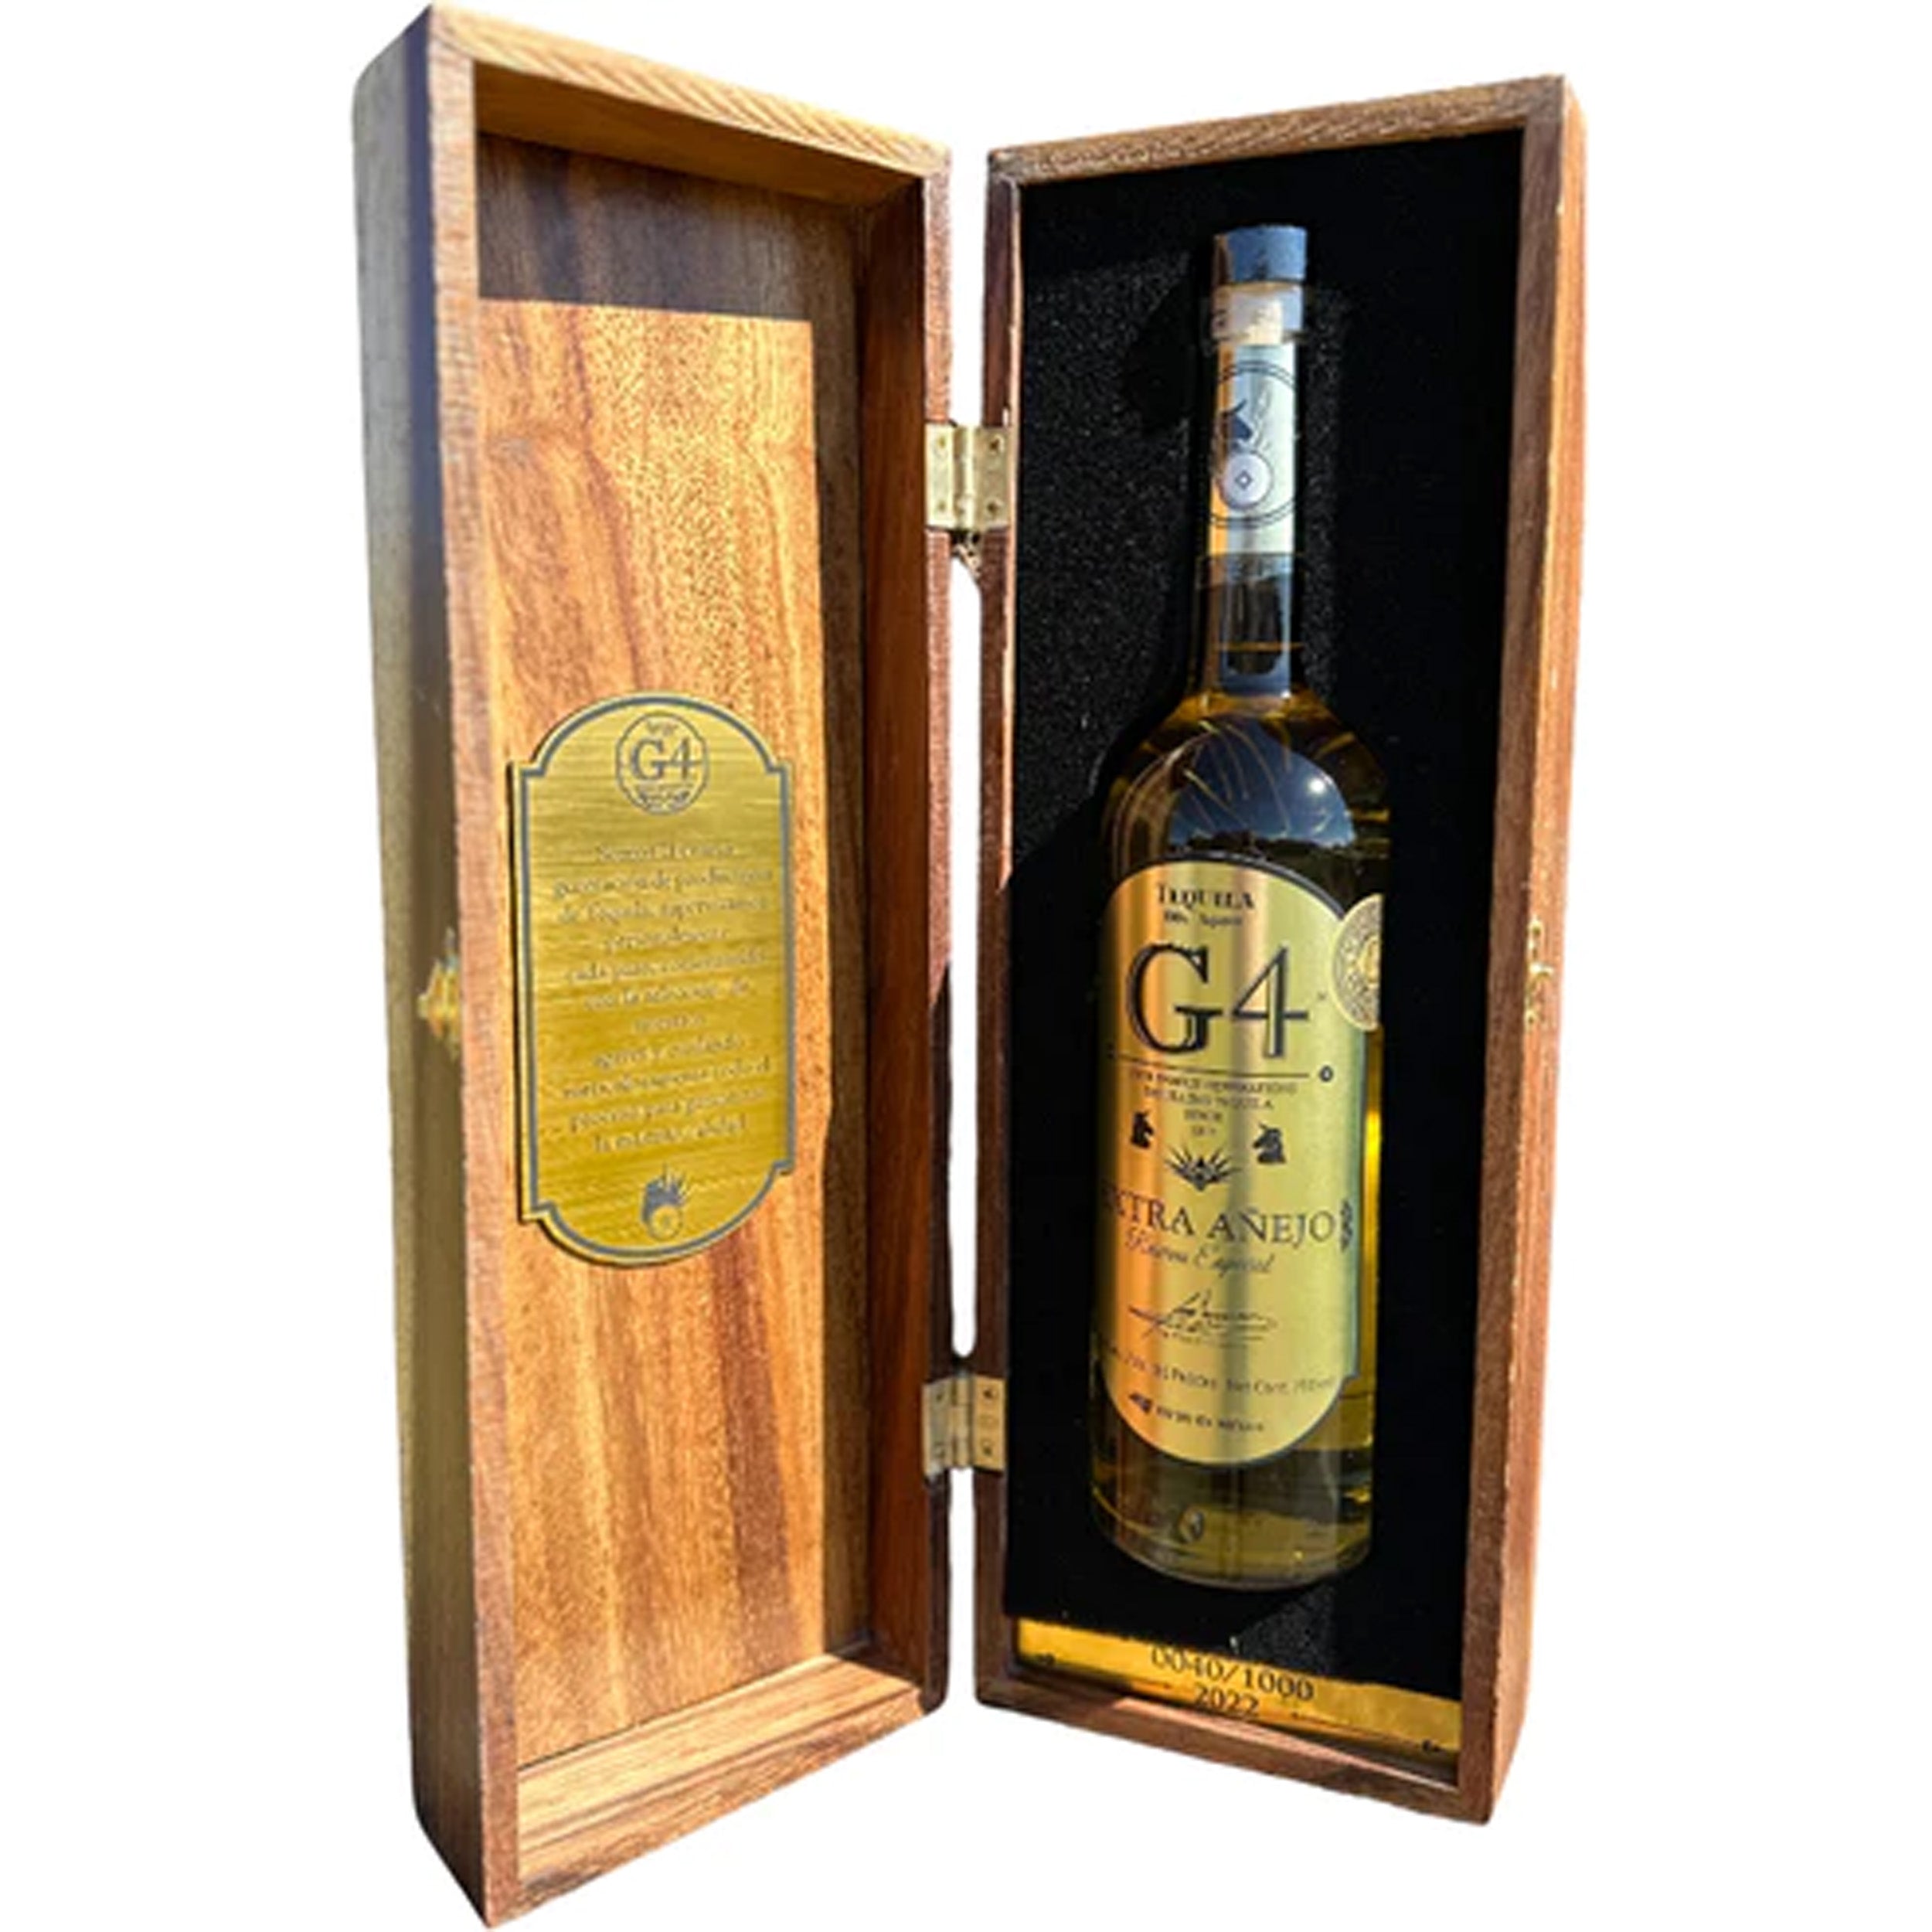 G4 Extra Anejo 6 Year Old Tequila